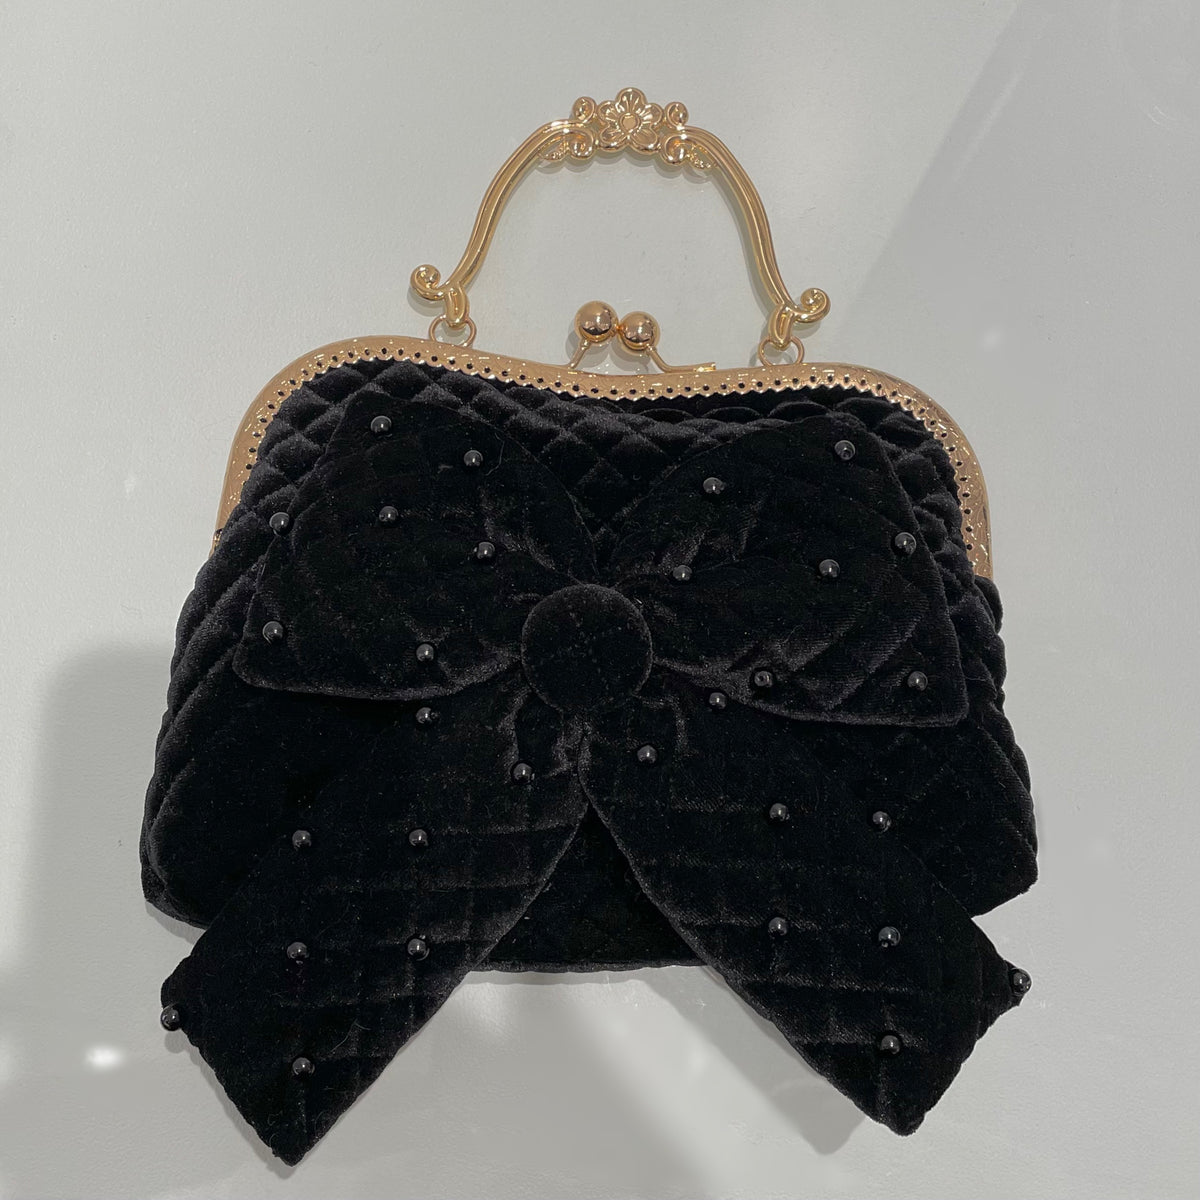 Our classic little black purse with velvet exterior a beautiful bow and spots that shine to add a level of sophistication to any outfit